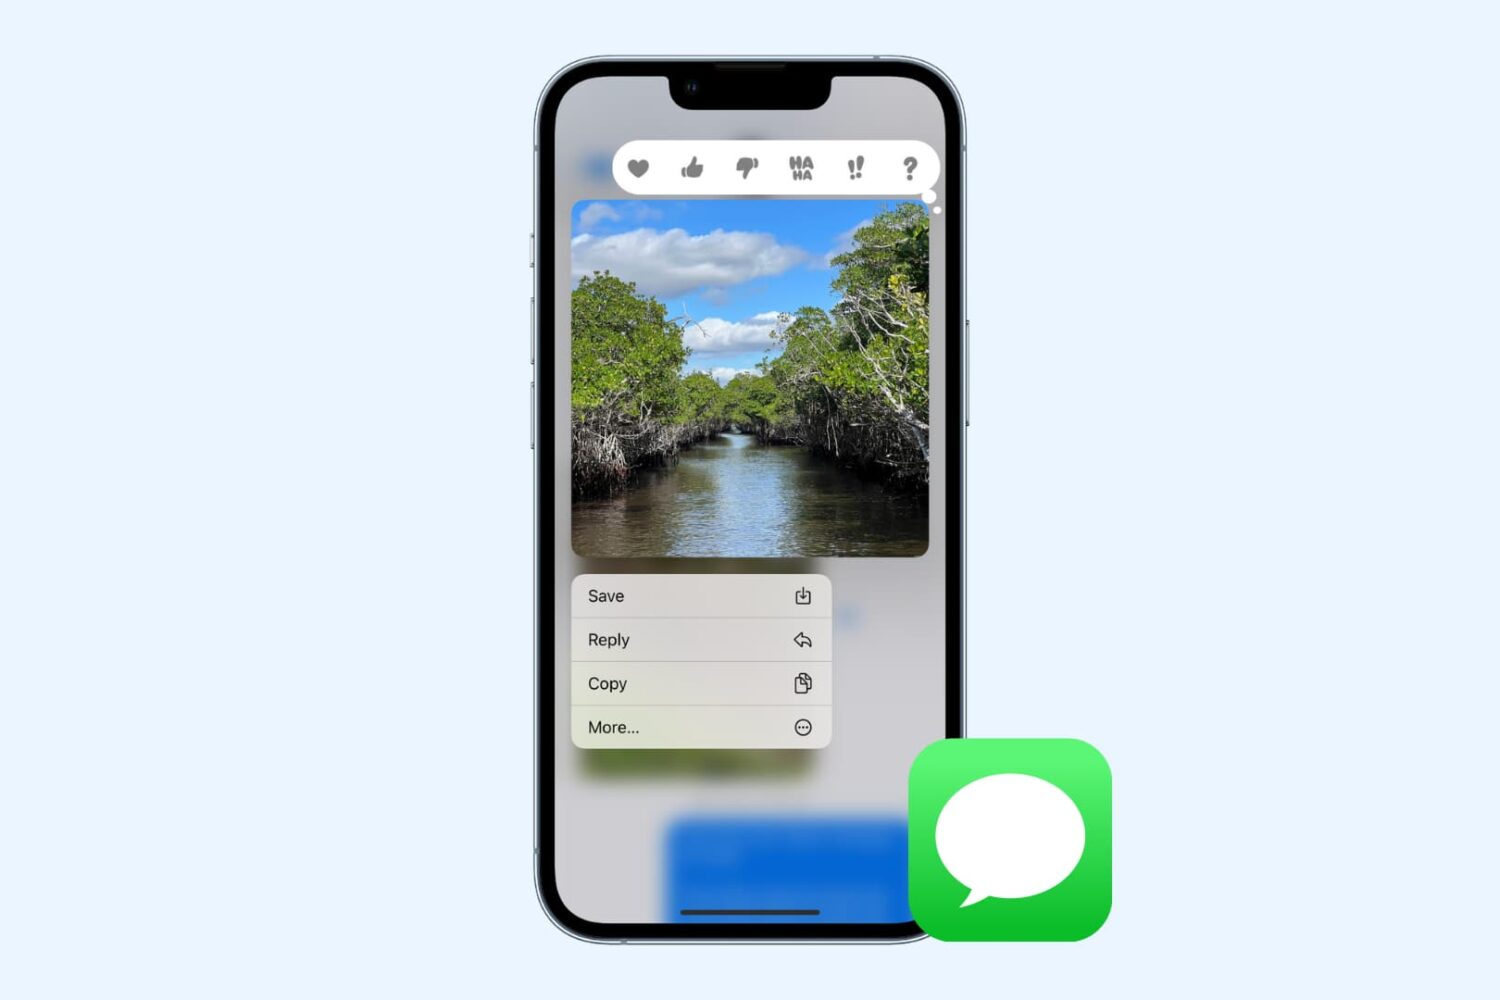 Save photos from Messages to iOS Photos app